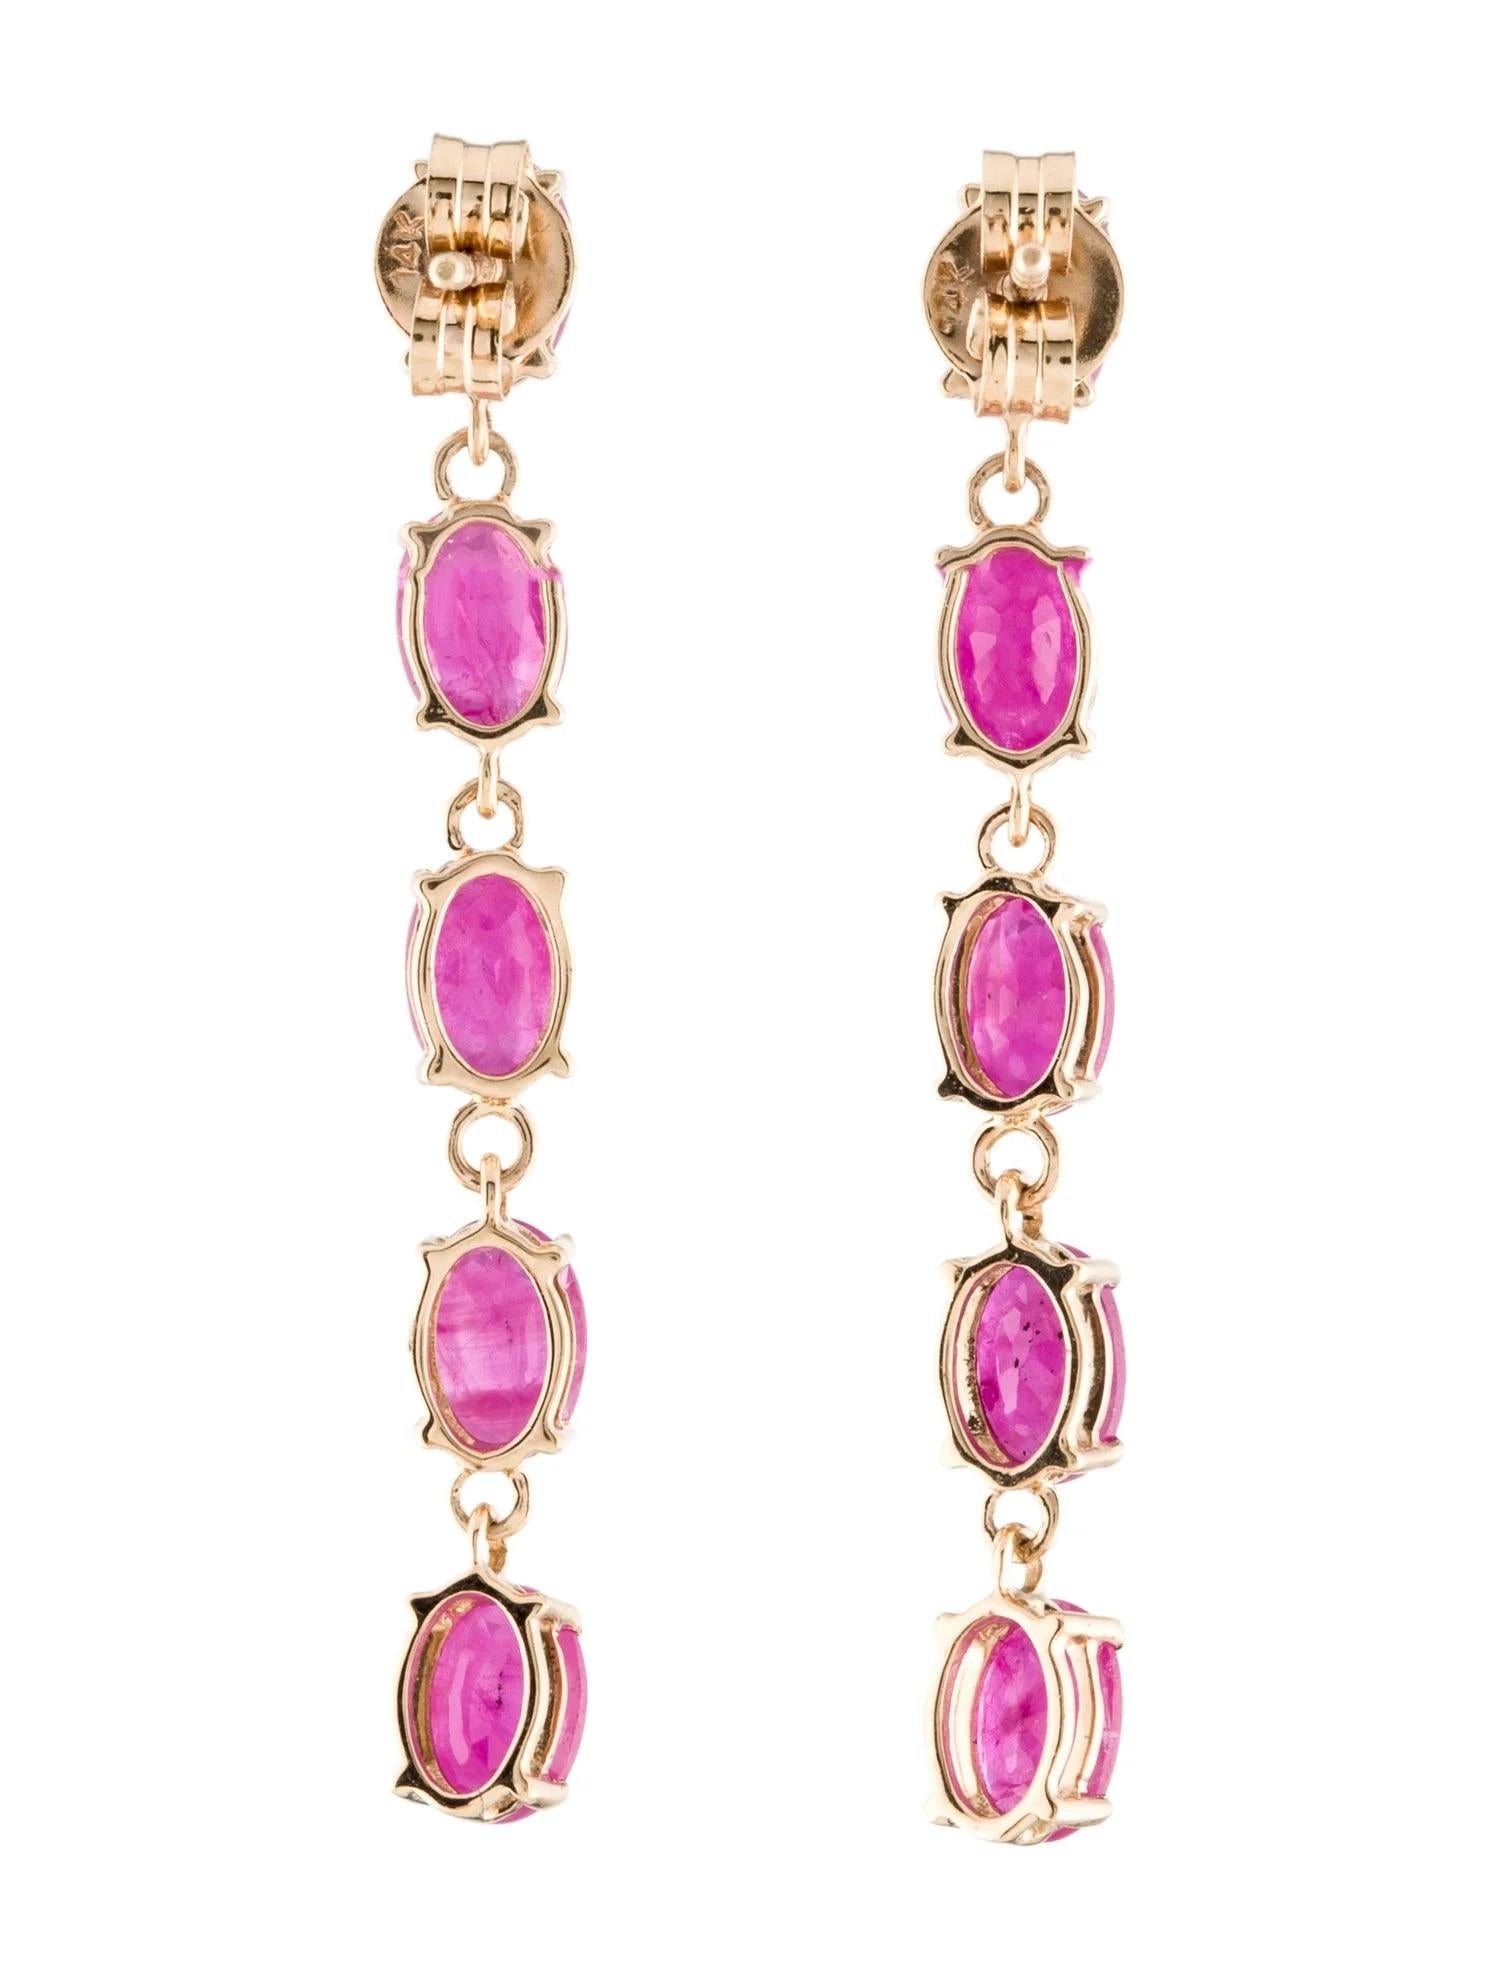 Indulge in the unparalleled beauty of these 14K yellow gold earrings, each featuring a magnificent 4.00 carat oval modified brilliant ruby. These earrings are a true testament to timeless elegance and masterful craftsmanship. The deep, enchanting